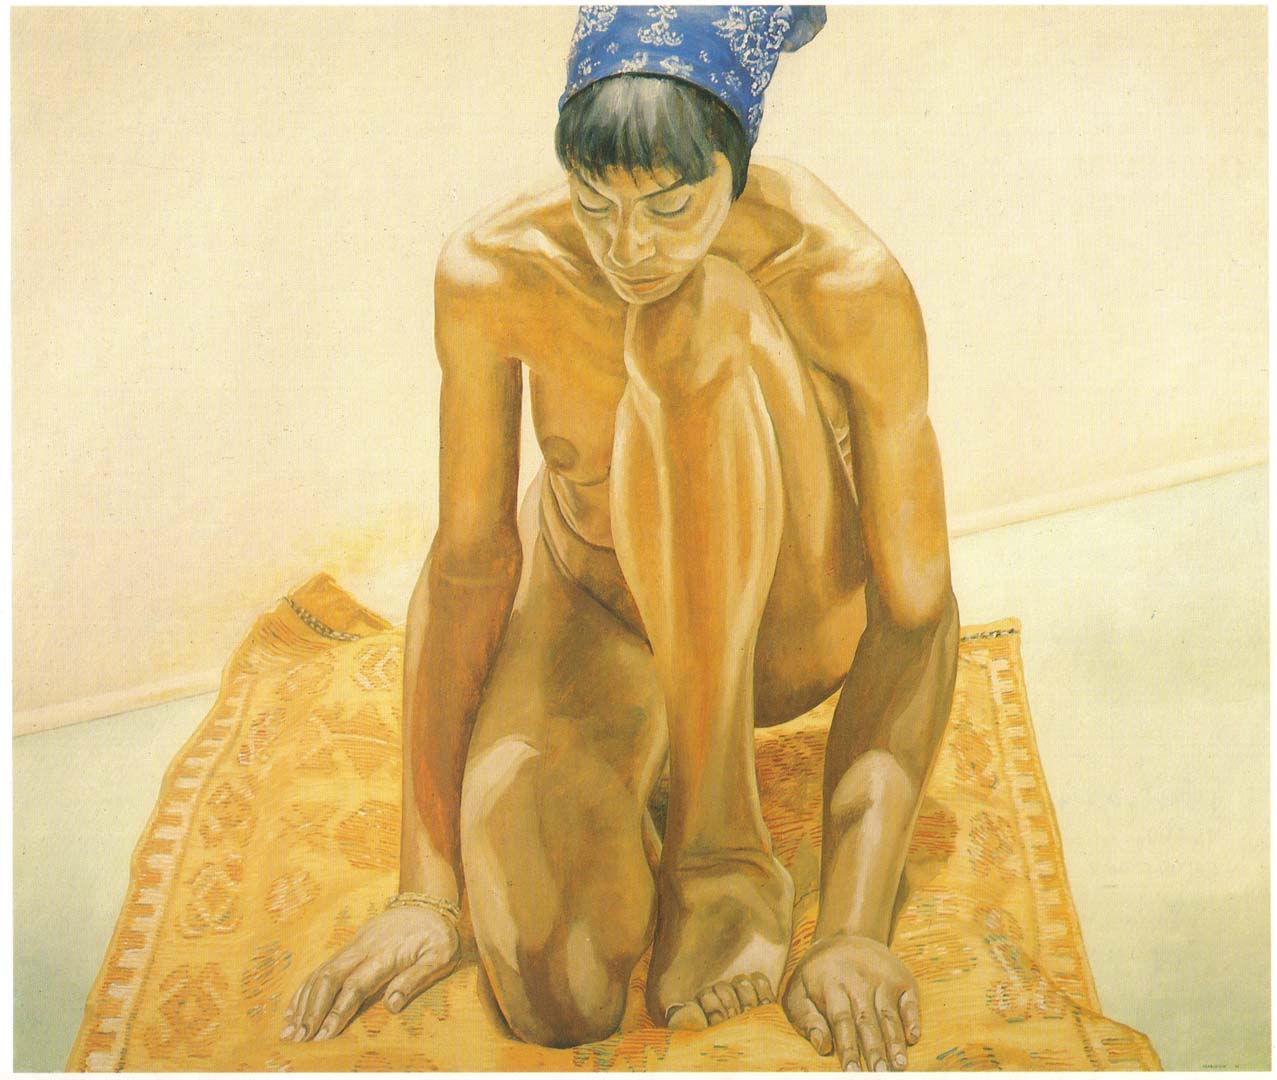 1969 Crouching Nude with Bandana Oil on Canvas 64 x 72